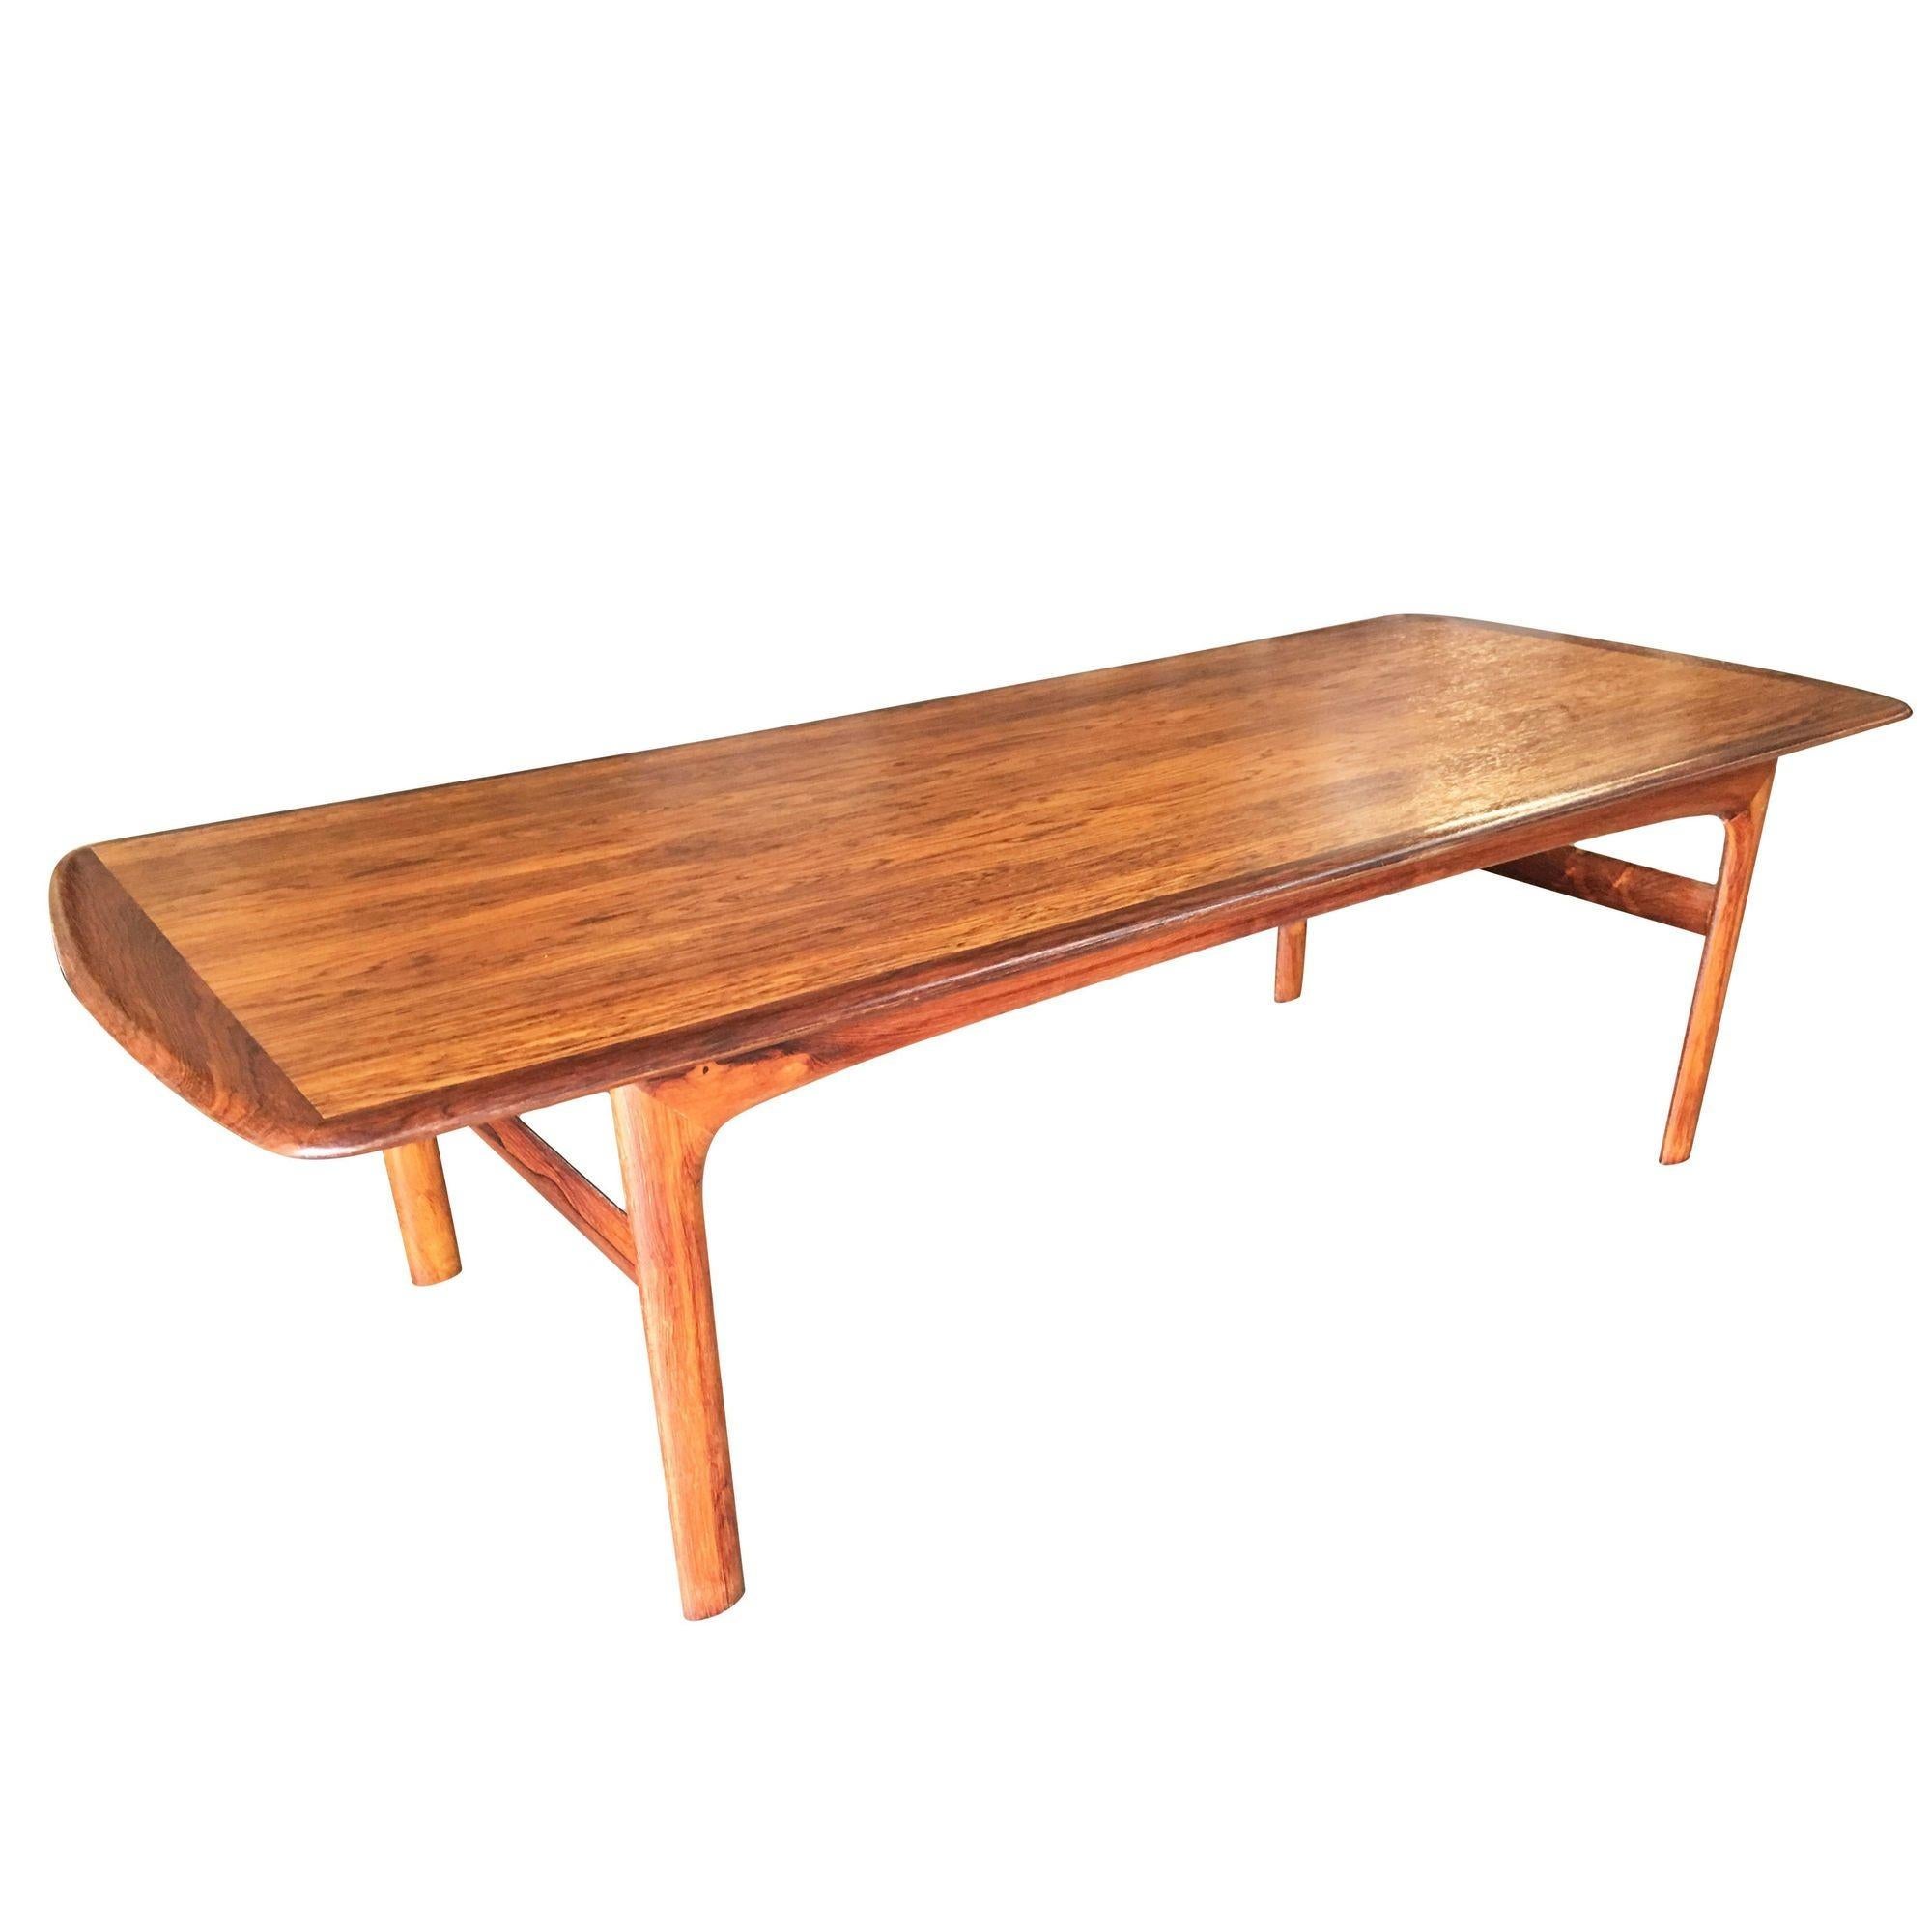 Mid-20th Century Swedish Mid Century Rosewood Coffee Table by Folke Ohlsson For Sale